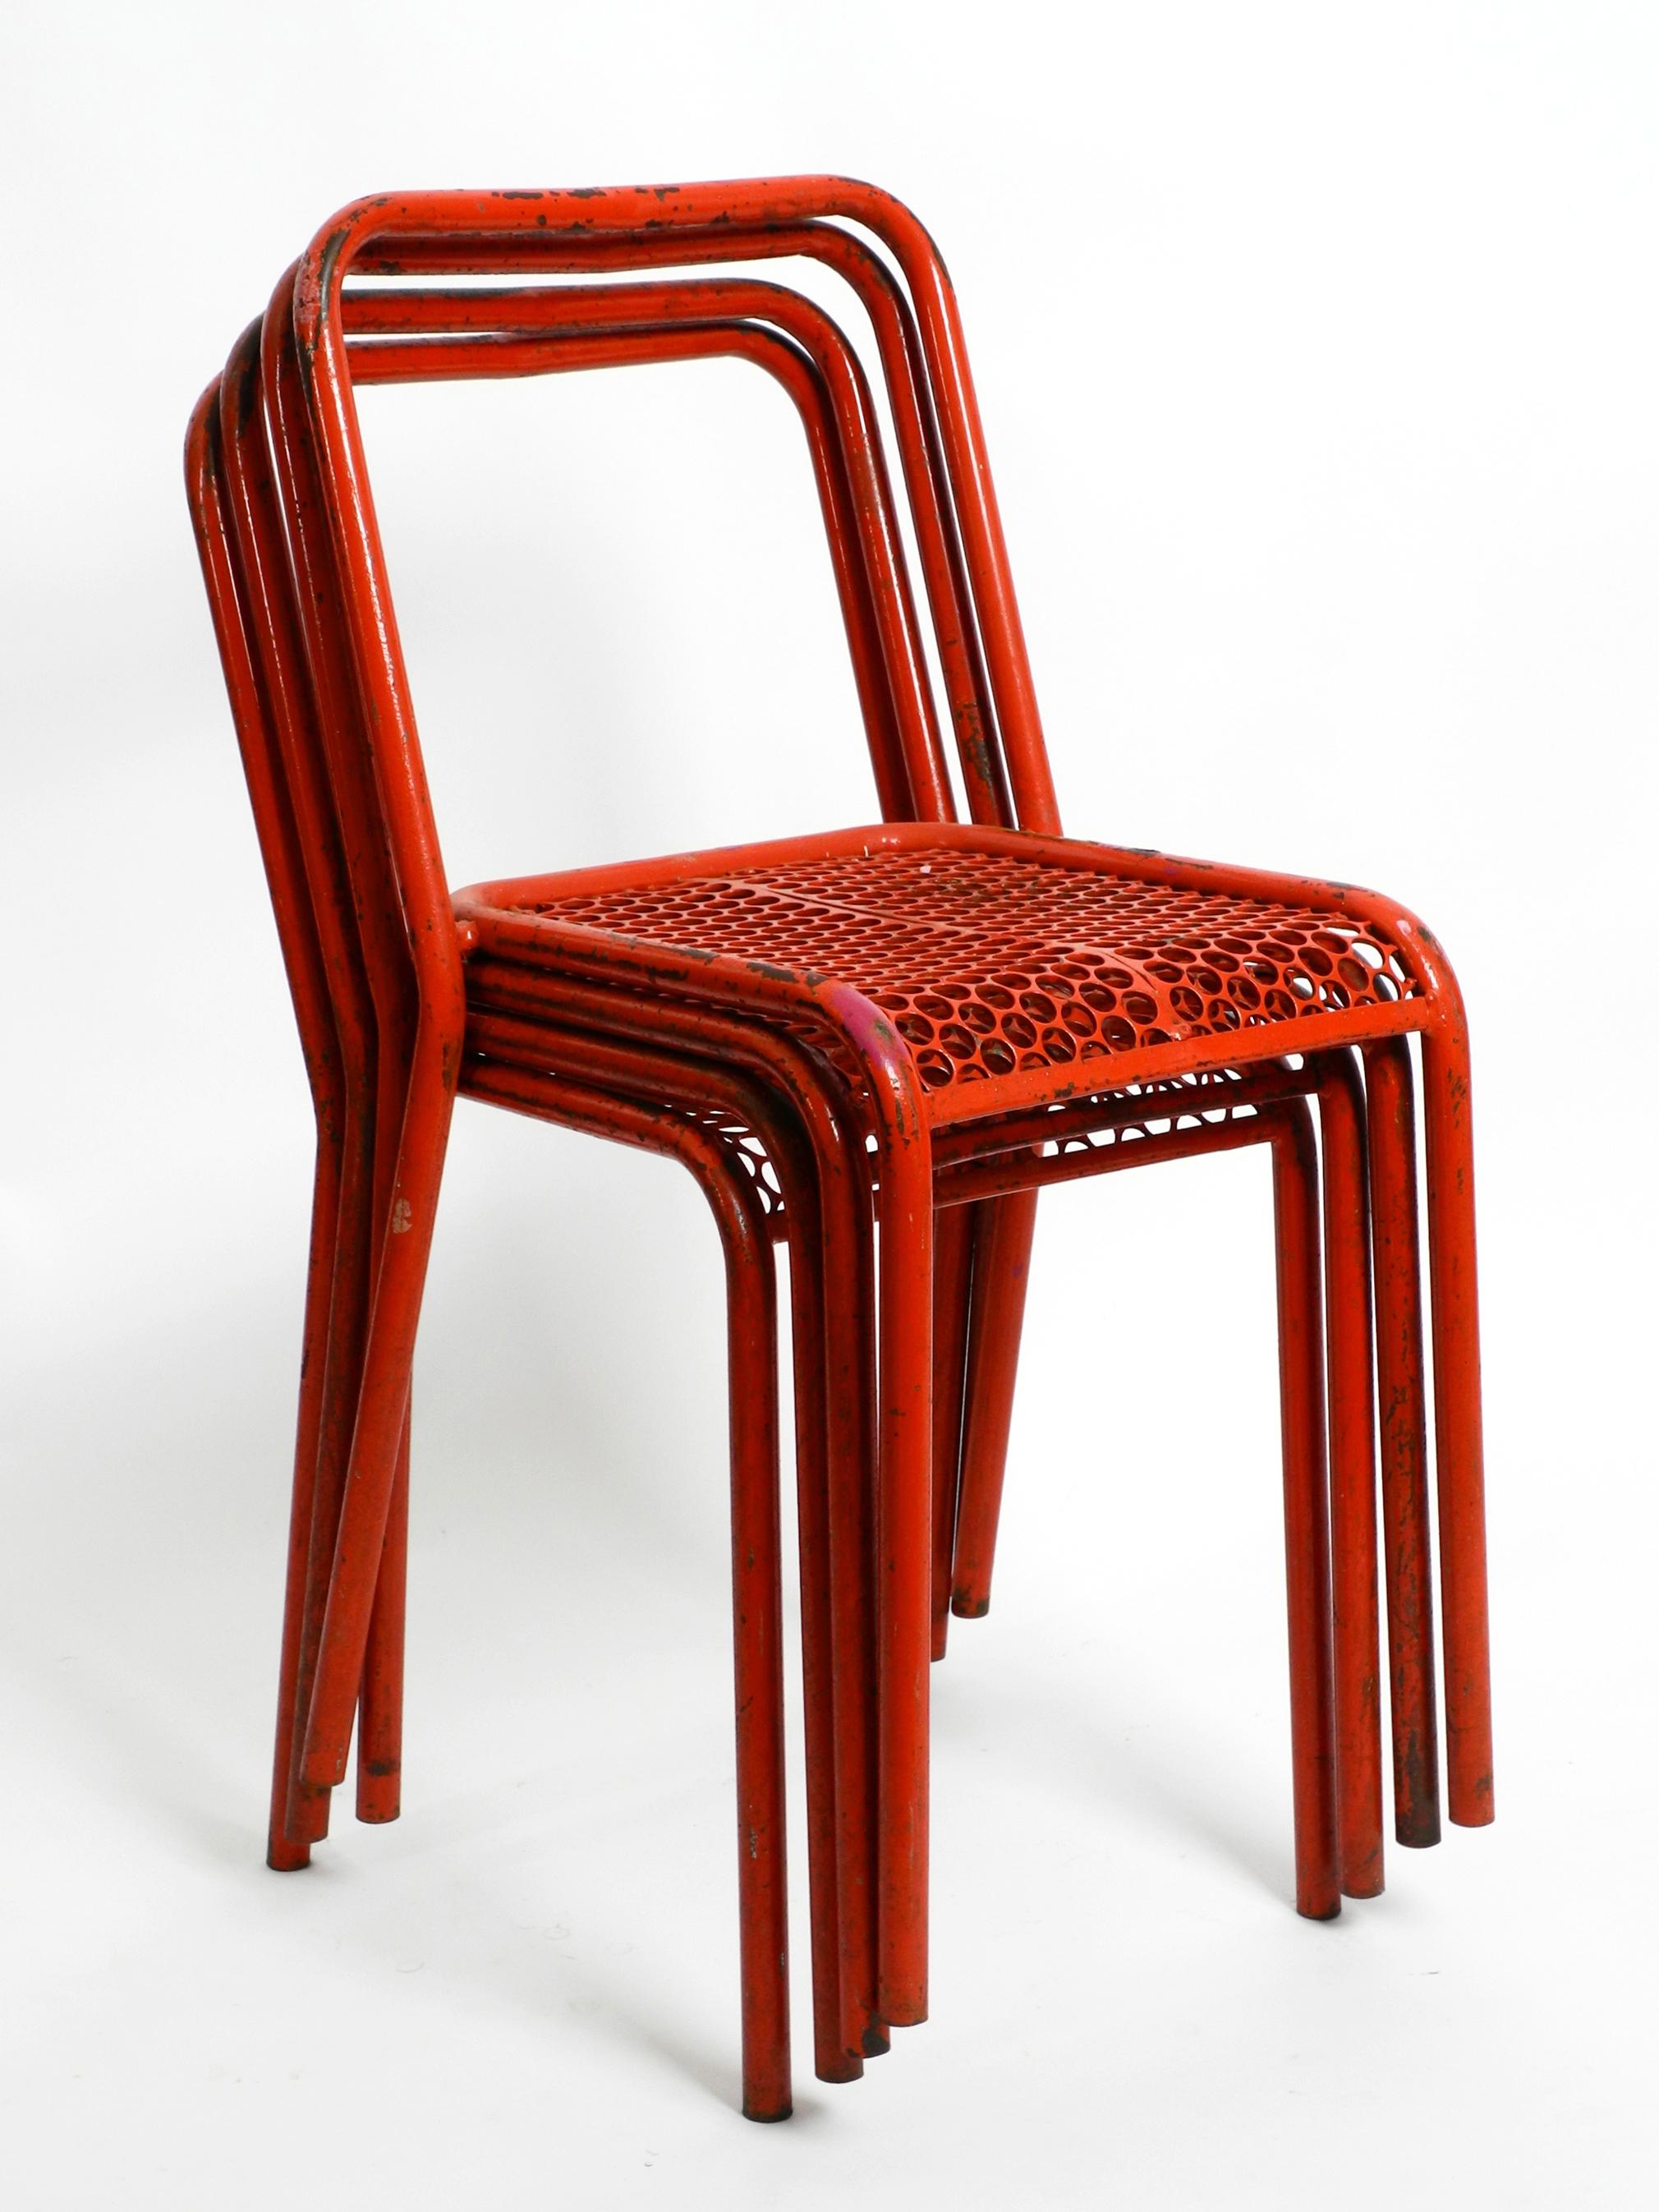 Four 1940s Industrial Metal Chairs by Réne Malaval in Their Original Red Color 5